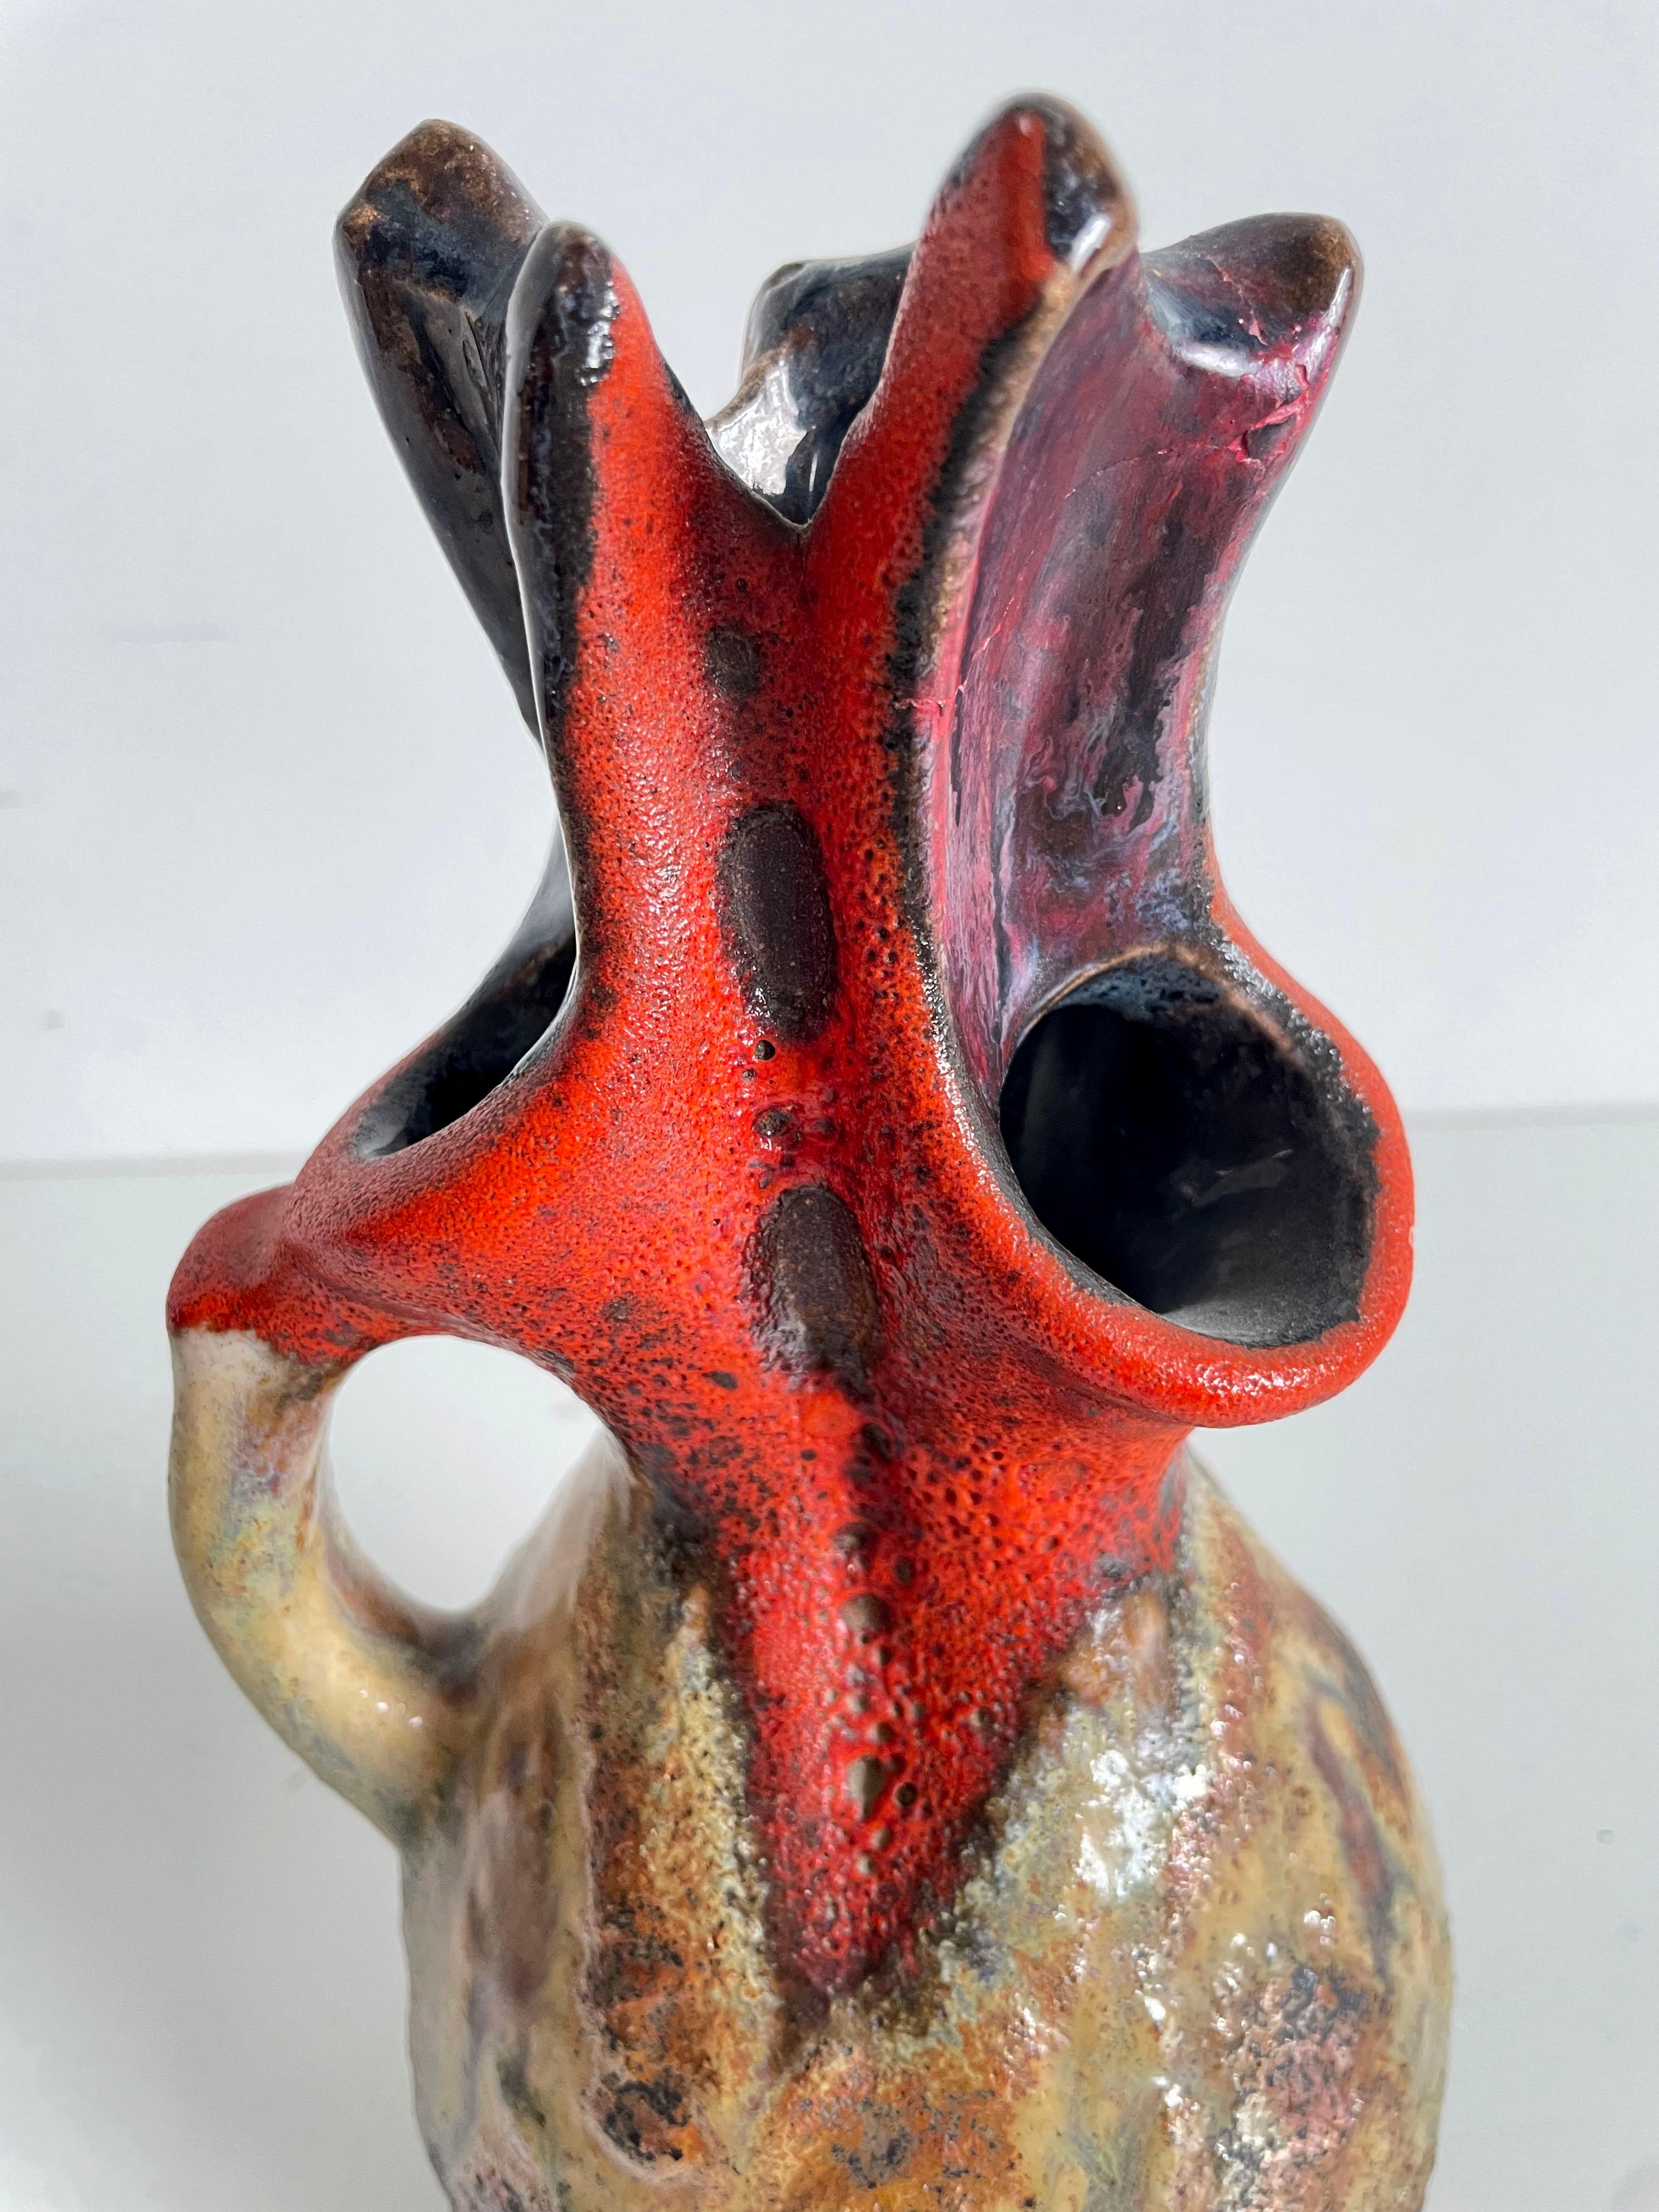 A Rare Walter Gerhards Design fat lava pitcher vase in organic form  with the beautiful colors Brown-Beige and Red, Form Number 200-26, West Germany 1970.

The vase is in excellent condition and weighs 1,2 kg.